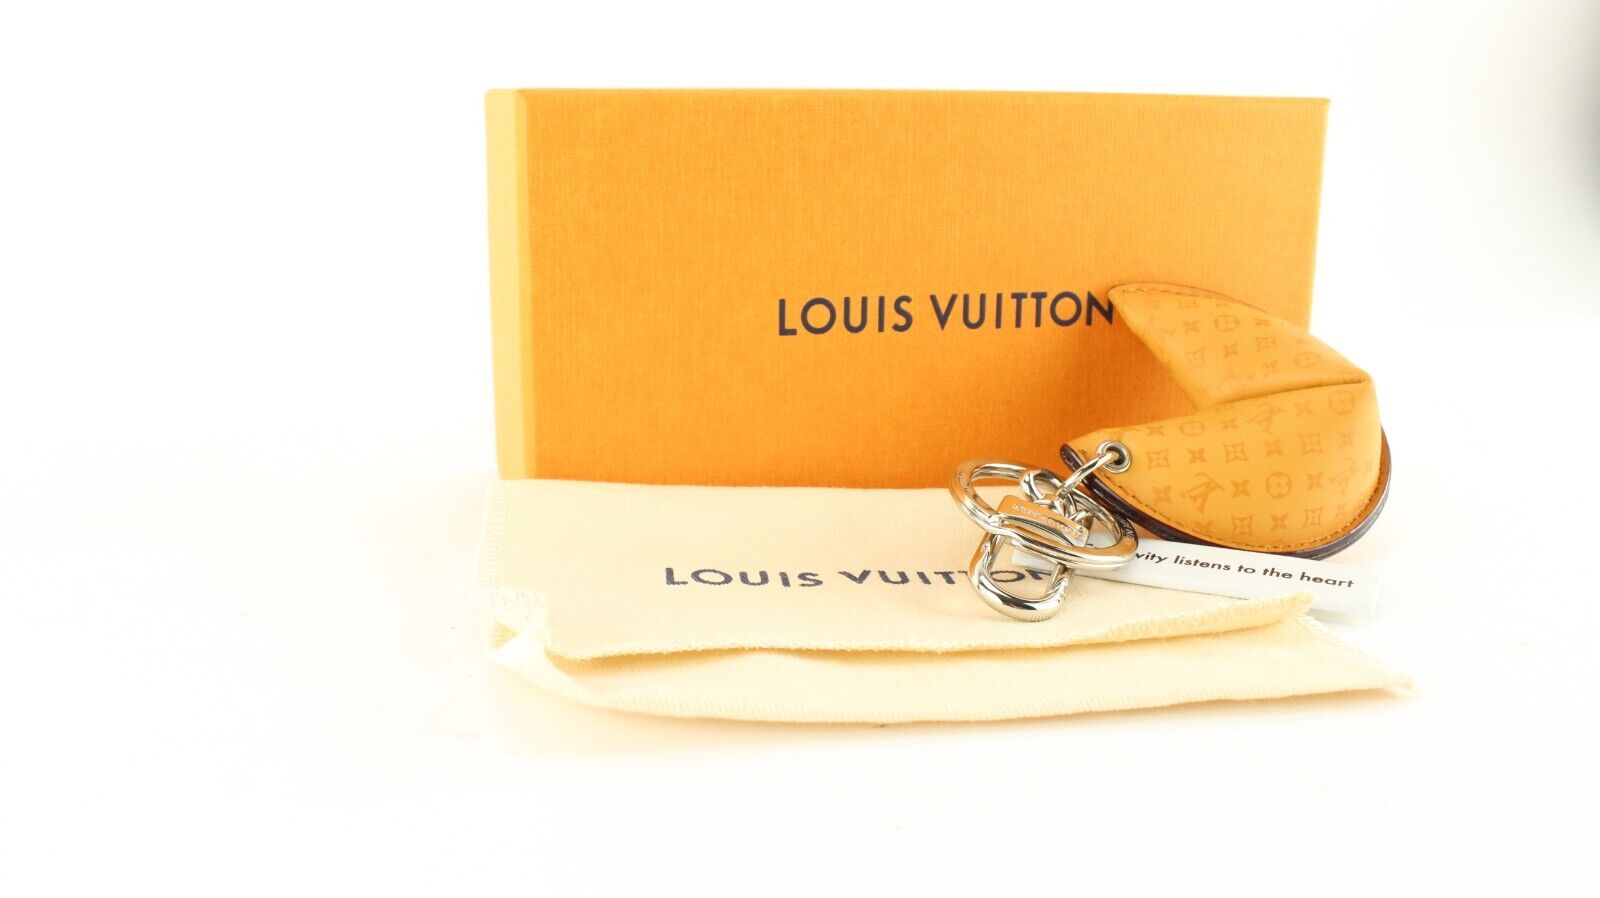 Louis Vuitton FORTUNE COOKIE BAG CHARM & KEY HOLDER Extremely Rare Sold Out  2023